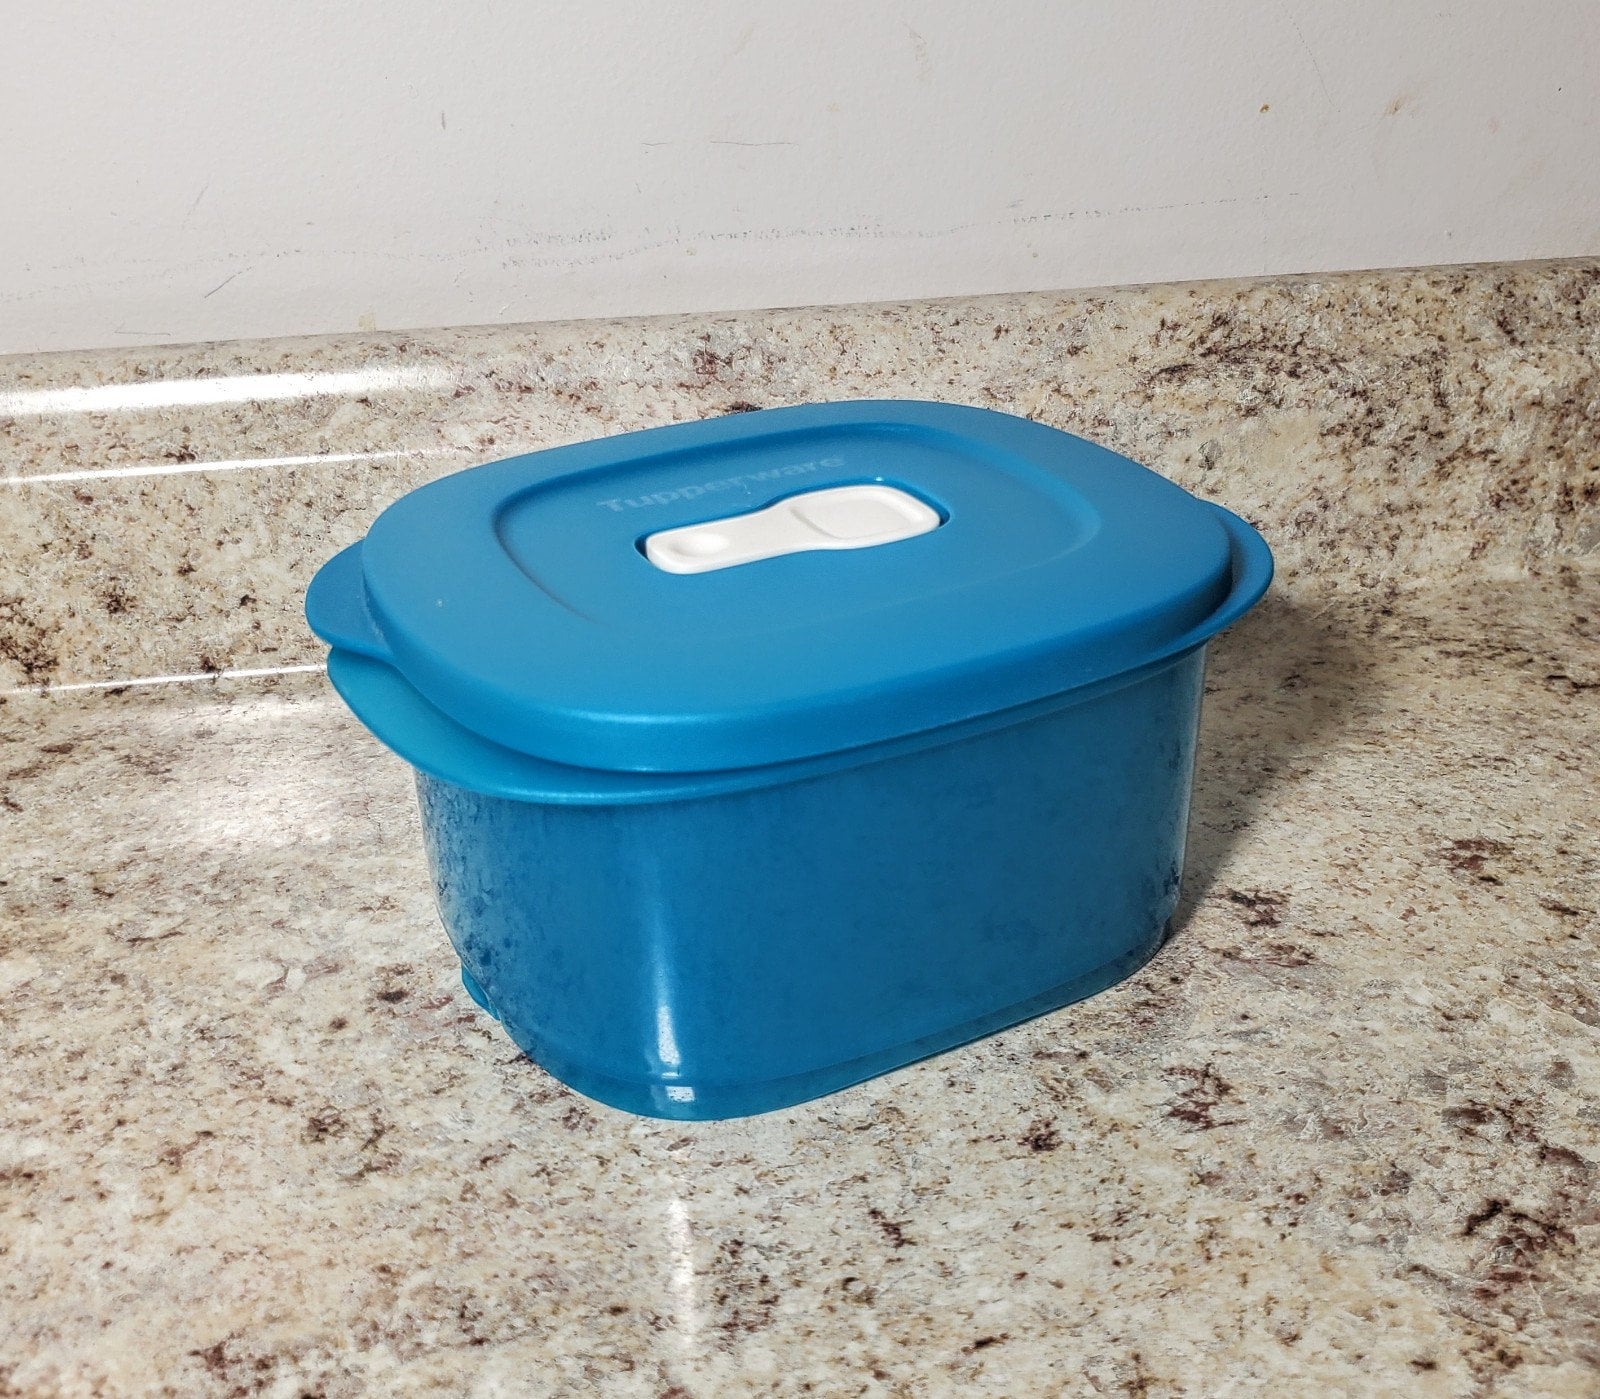 Expandable 7.5 Cup Square Food Container, Leftovers